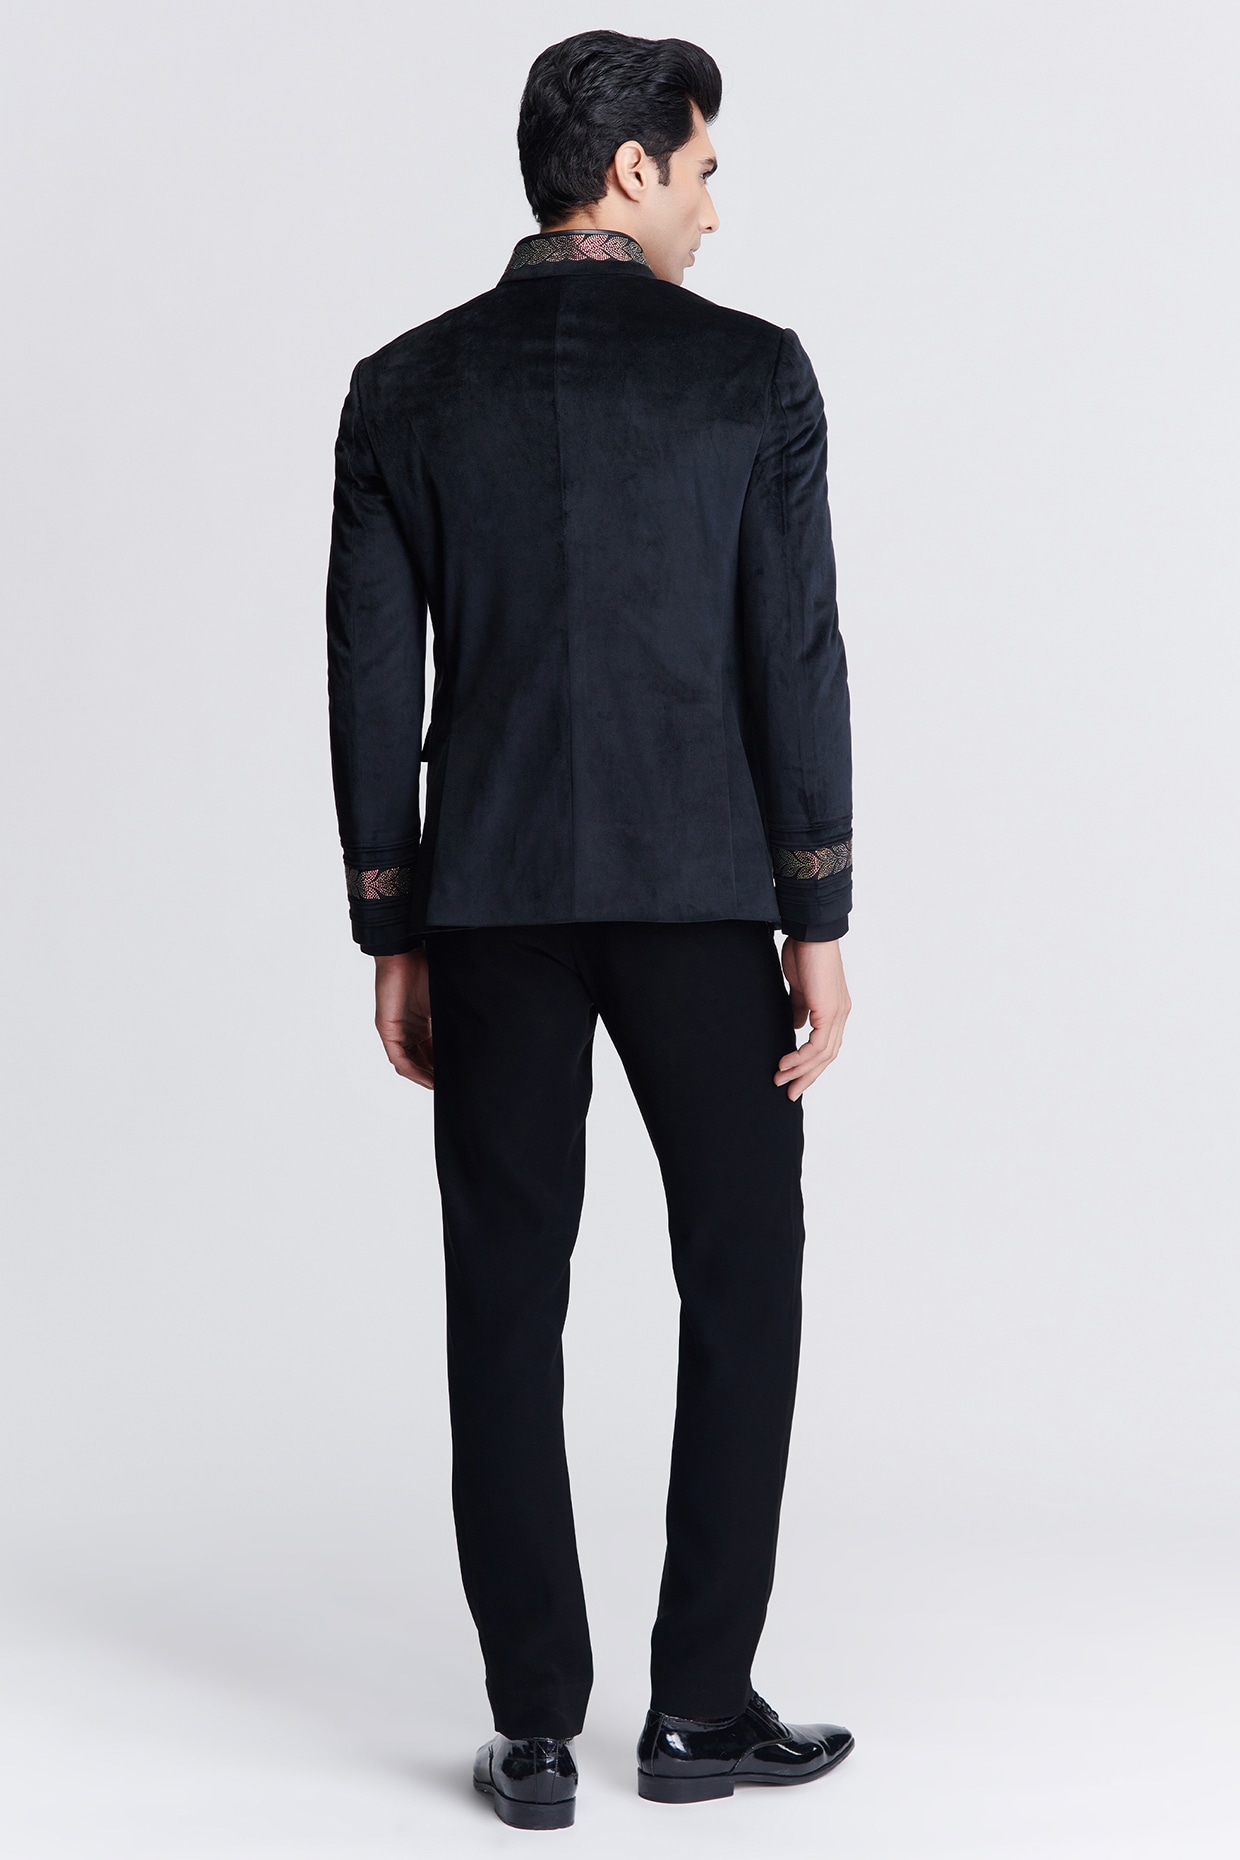 Twisted Tailor velvet suit trousers with swirl design in midnight blue |  ASOS